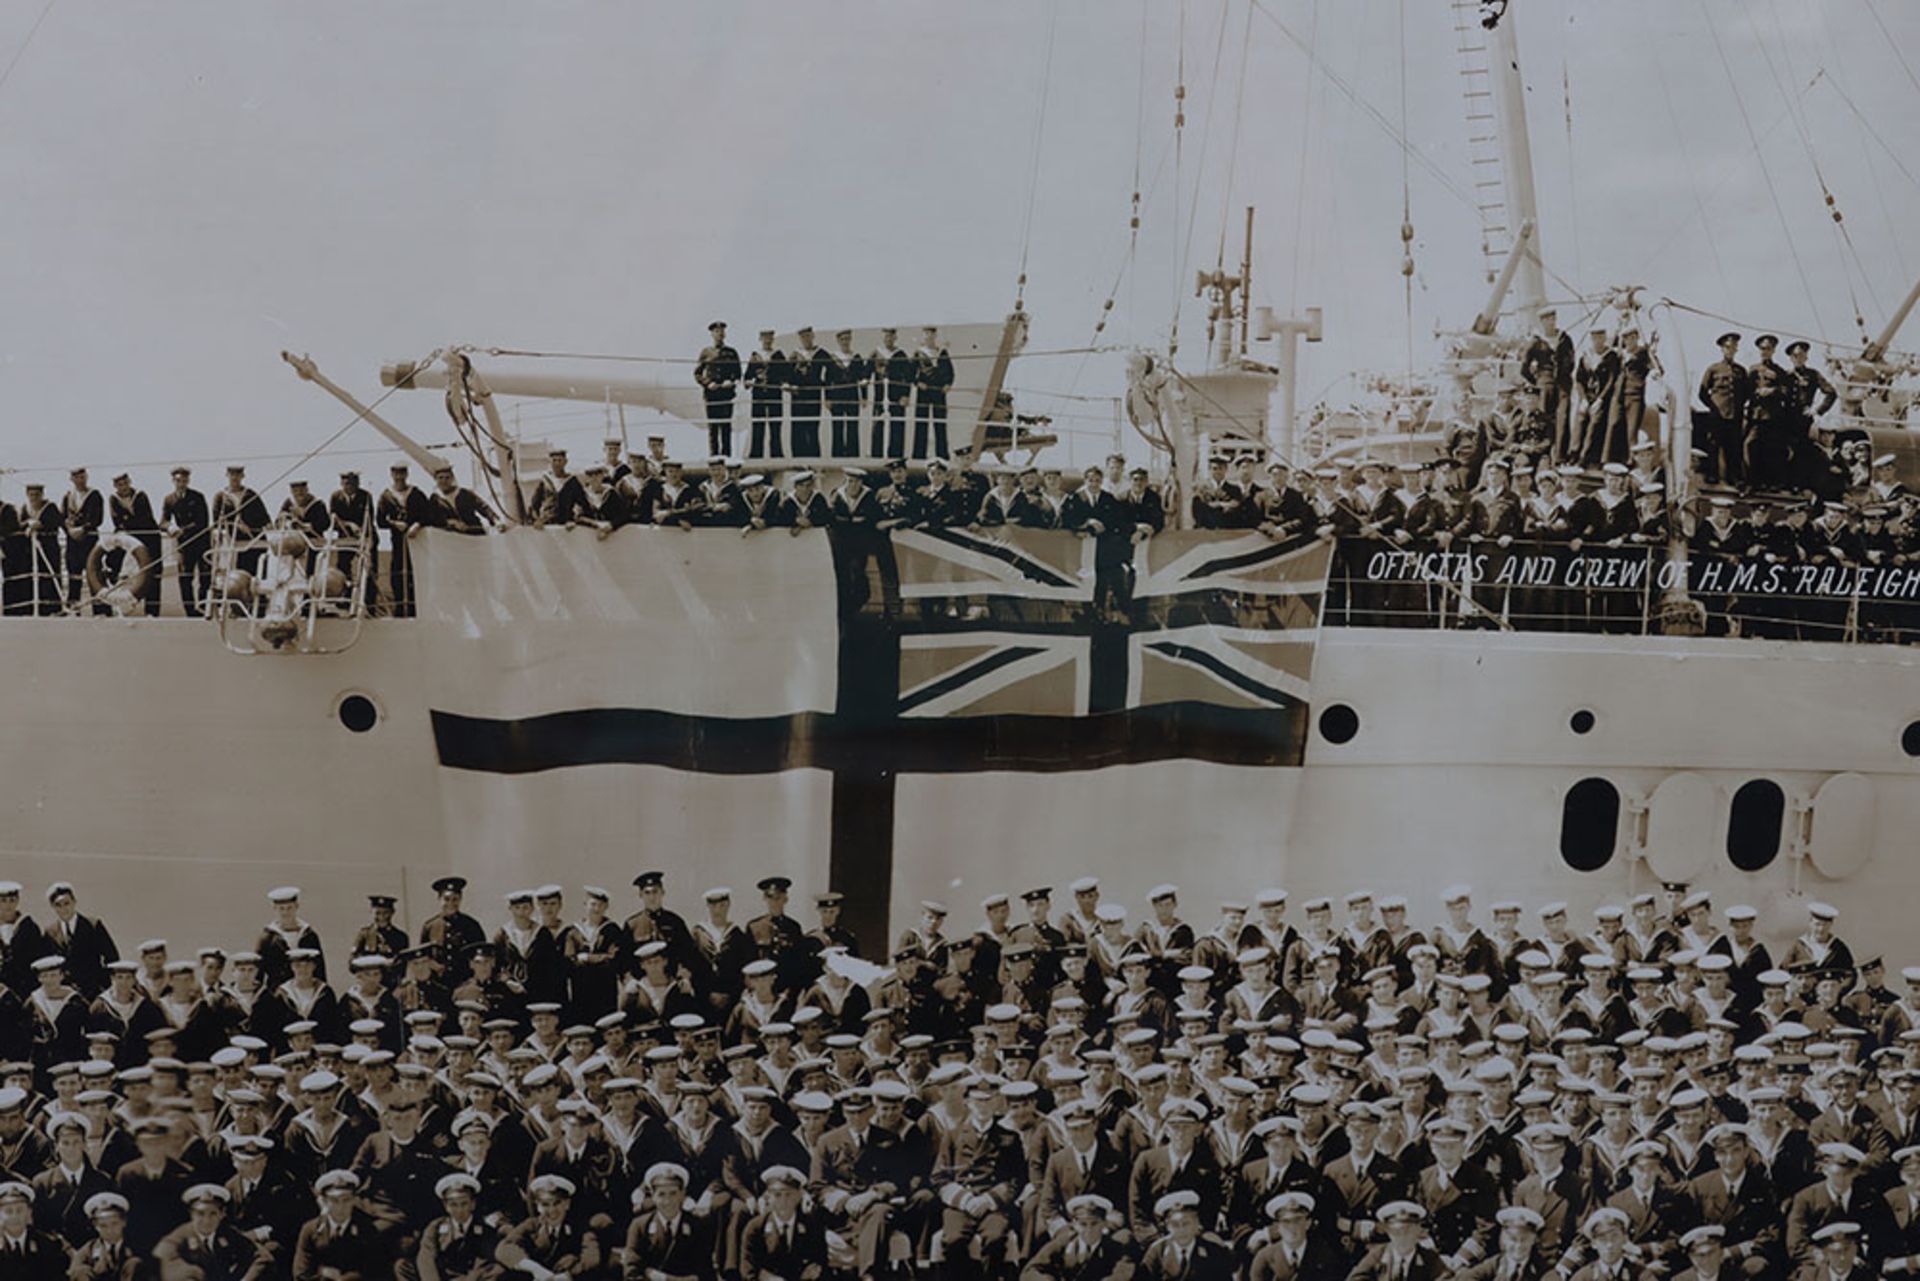 Large Framed and Glazed Panoramic Photograph of the Officers and Crew of HMS Raleigh